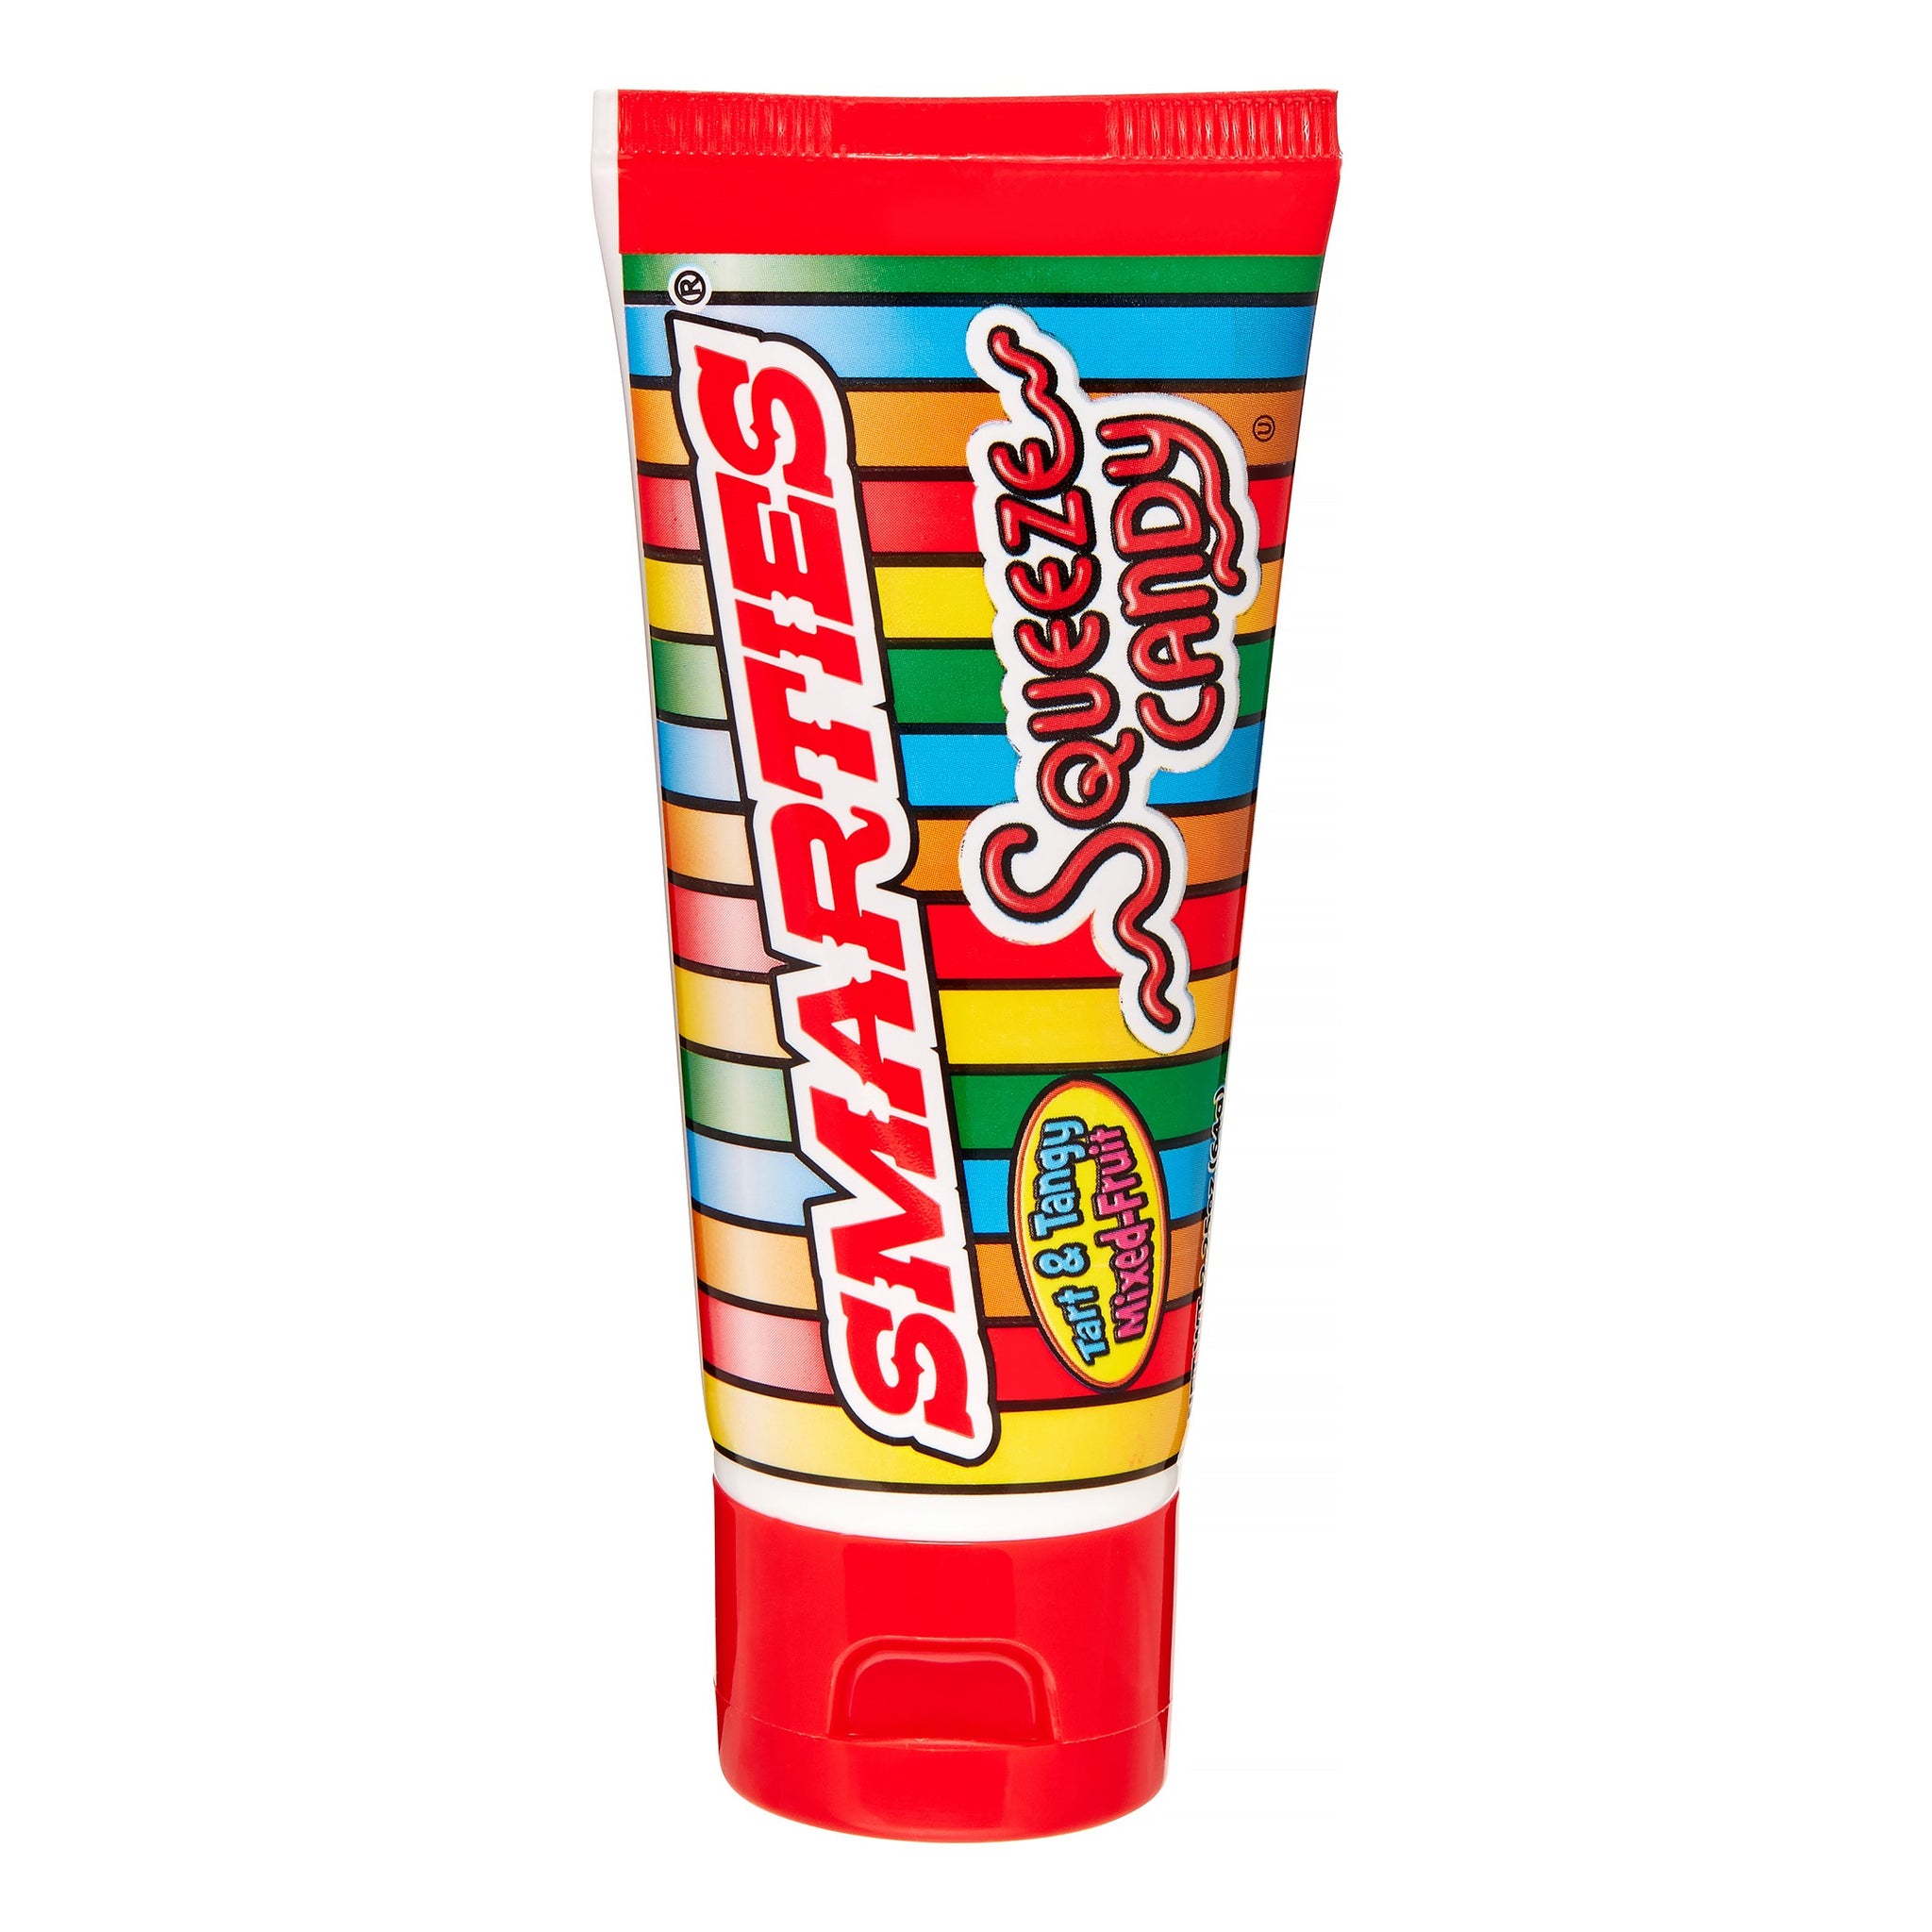 Smarties Squeeze Candy, 2.25oz